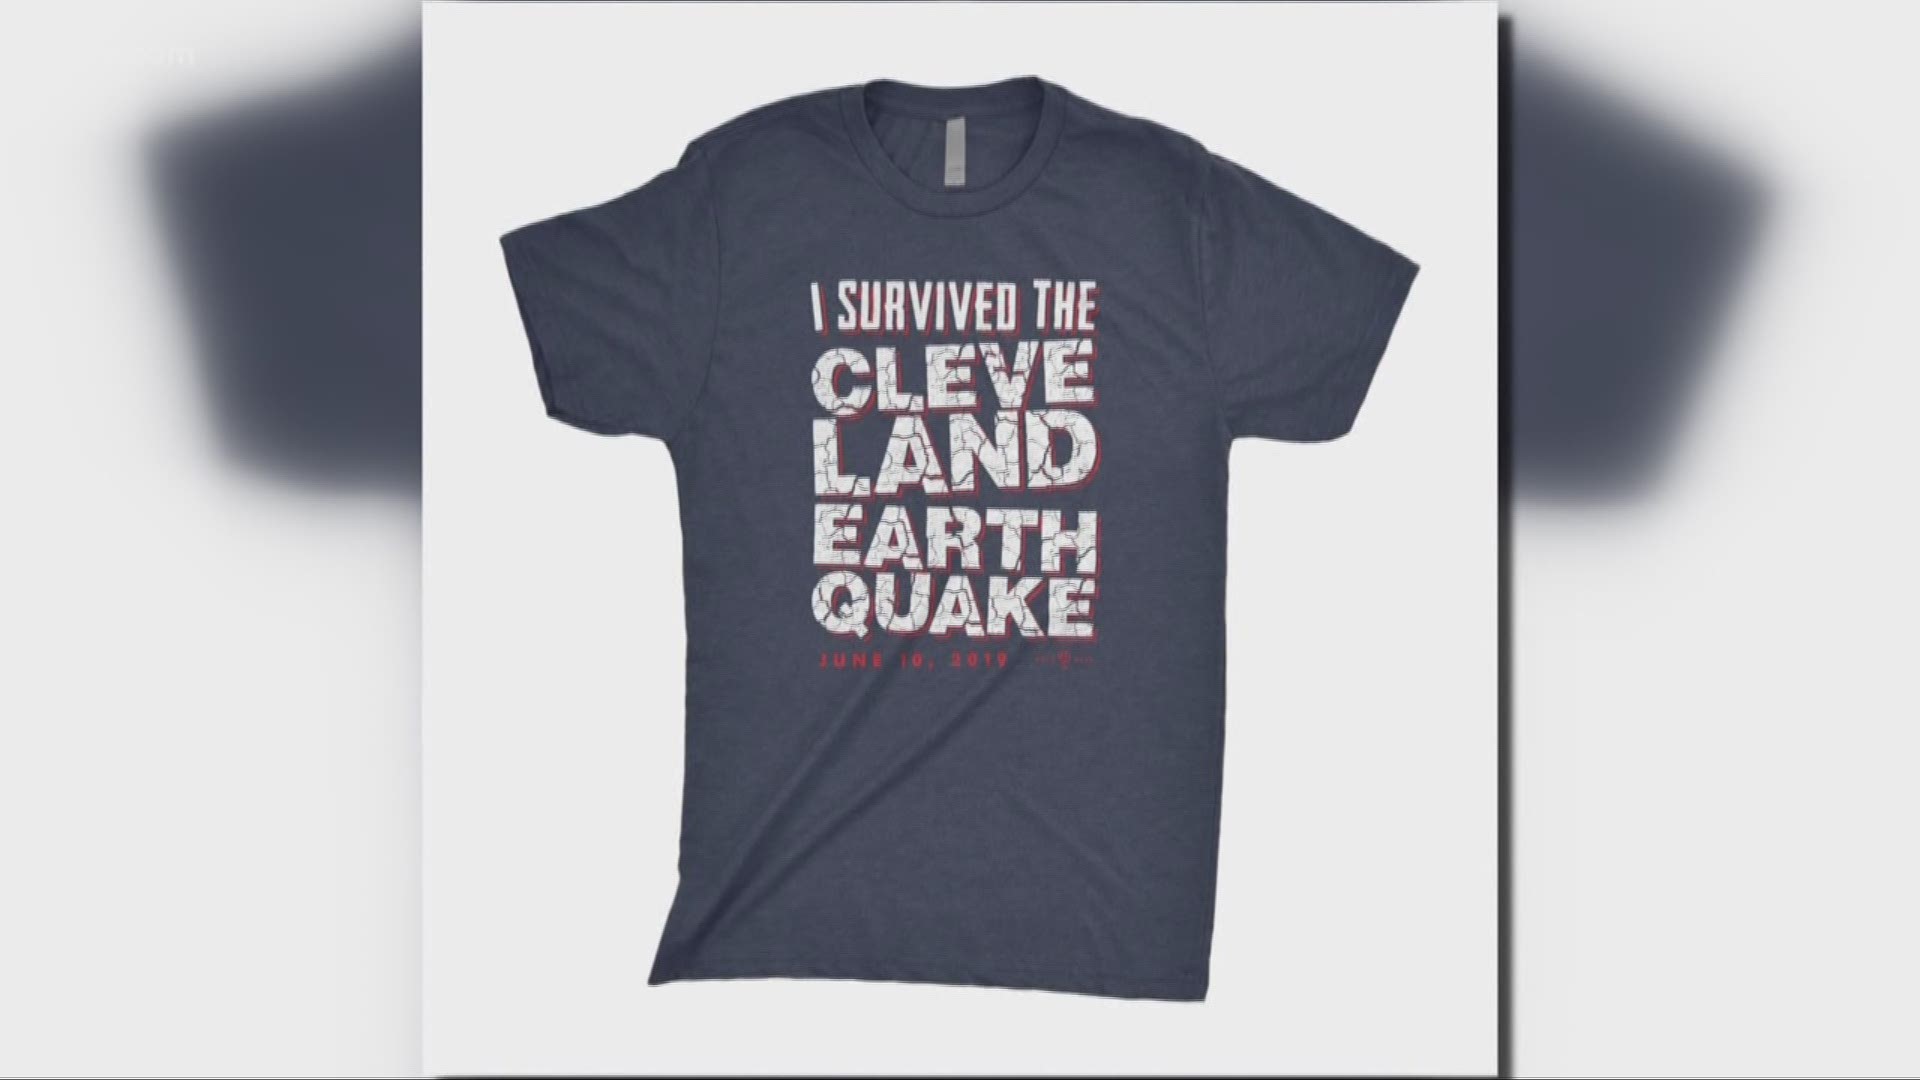 Earthquake parody t-shirts available